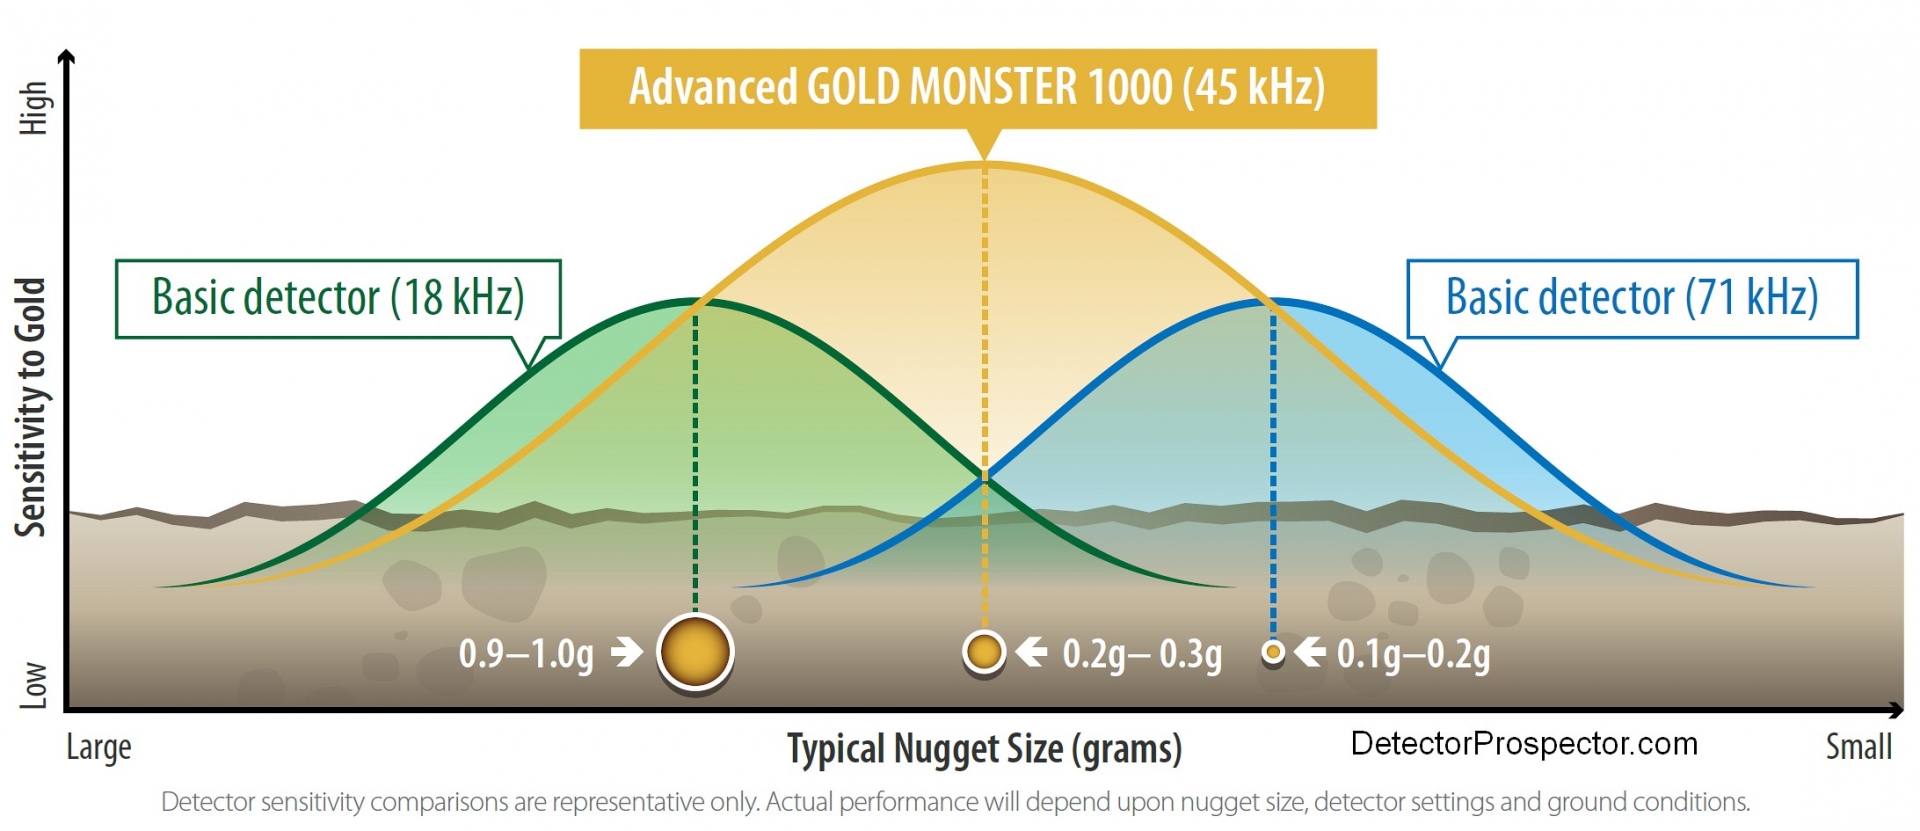 minelab-gold-monster-1000-45-khz-operating-frequency-compared-large.jpg